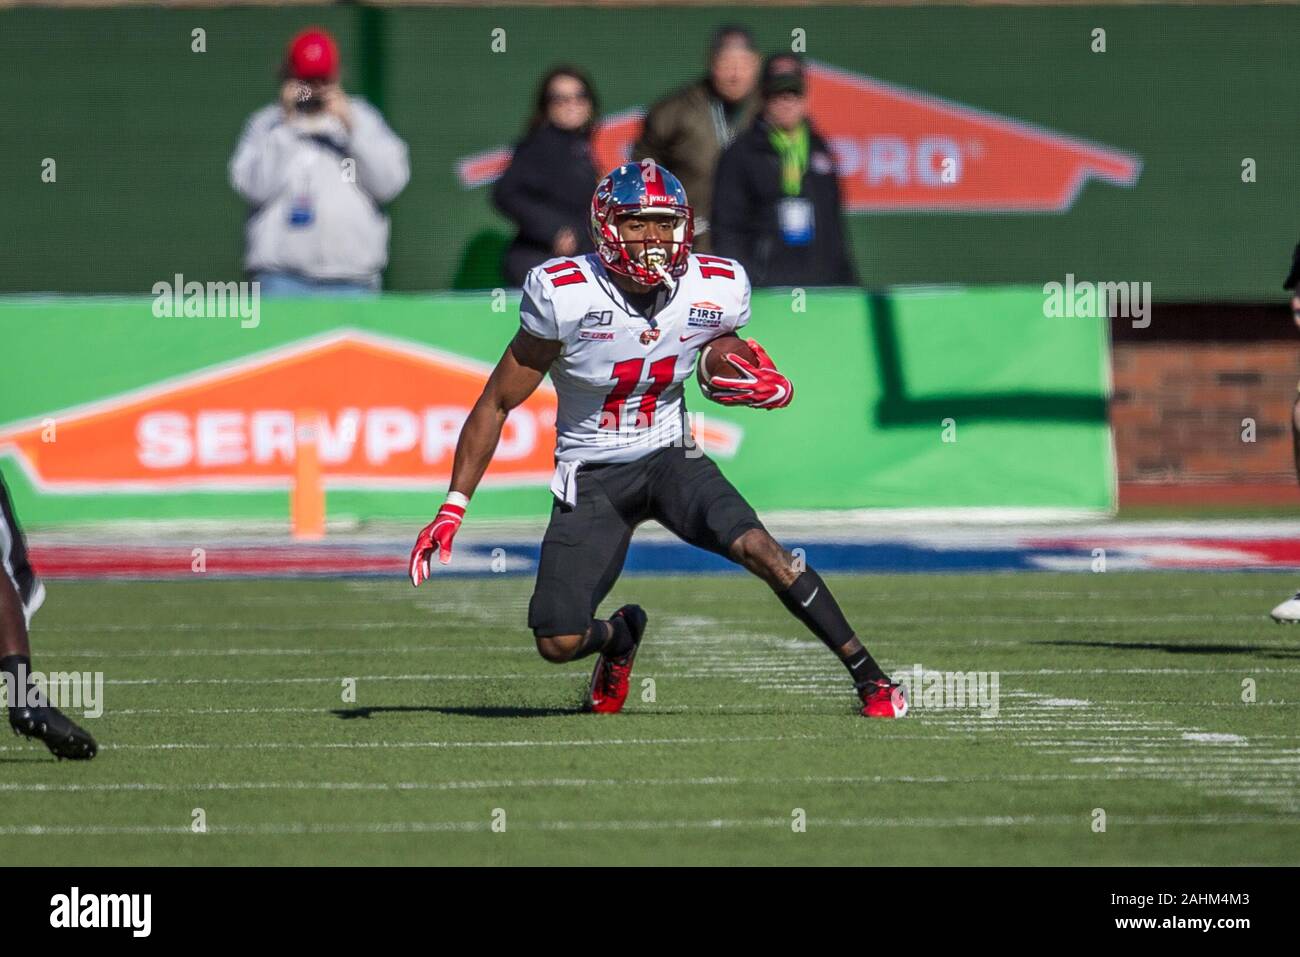 Dallas, Texas, USA. 30th Dec, 2019. Western Kentucky Hilltoppers wide receiver Lucky Jackson (11) in action during the Servpro First Responder Bowl game between Western Michigan Broncos and the Western Kentucky Hilltoppers at the gerald Ford Stadiuml Stadium in Dallas, Texas. Credit: Dan Wozniak/ZUMA Wire/Alamy Live News Stock Photo